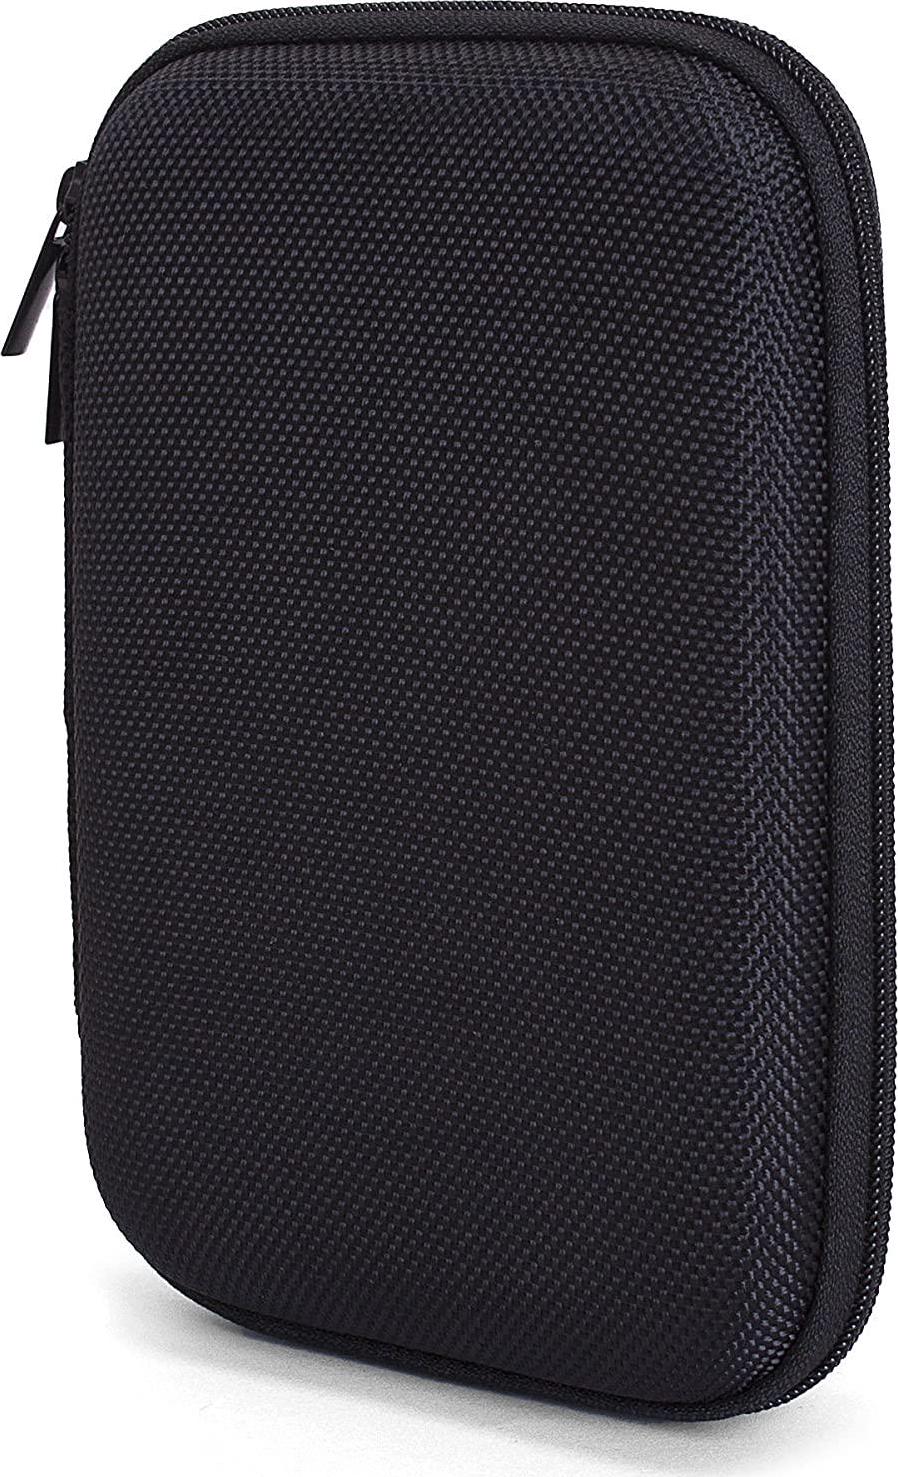 Ginsco, Ginsco EVA Hard Carrying Case for Portable External Hard Drive Power Bank Charger USB Cable Battery SSD Case (Black)